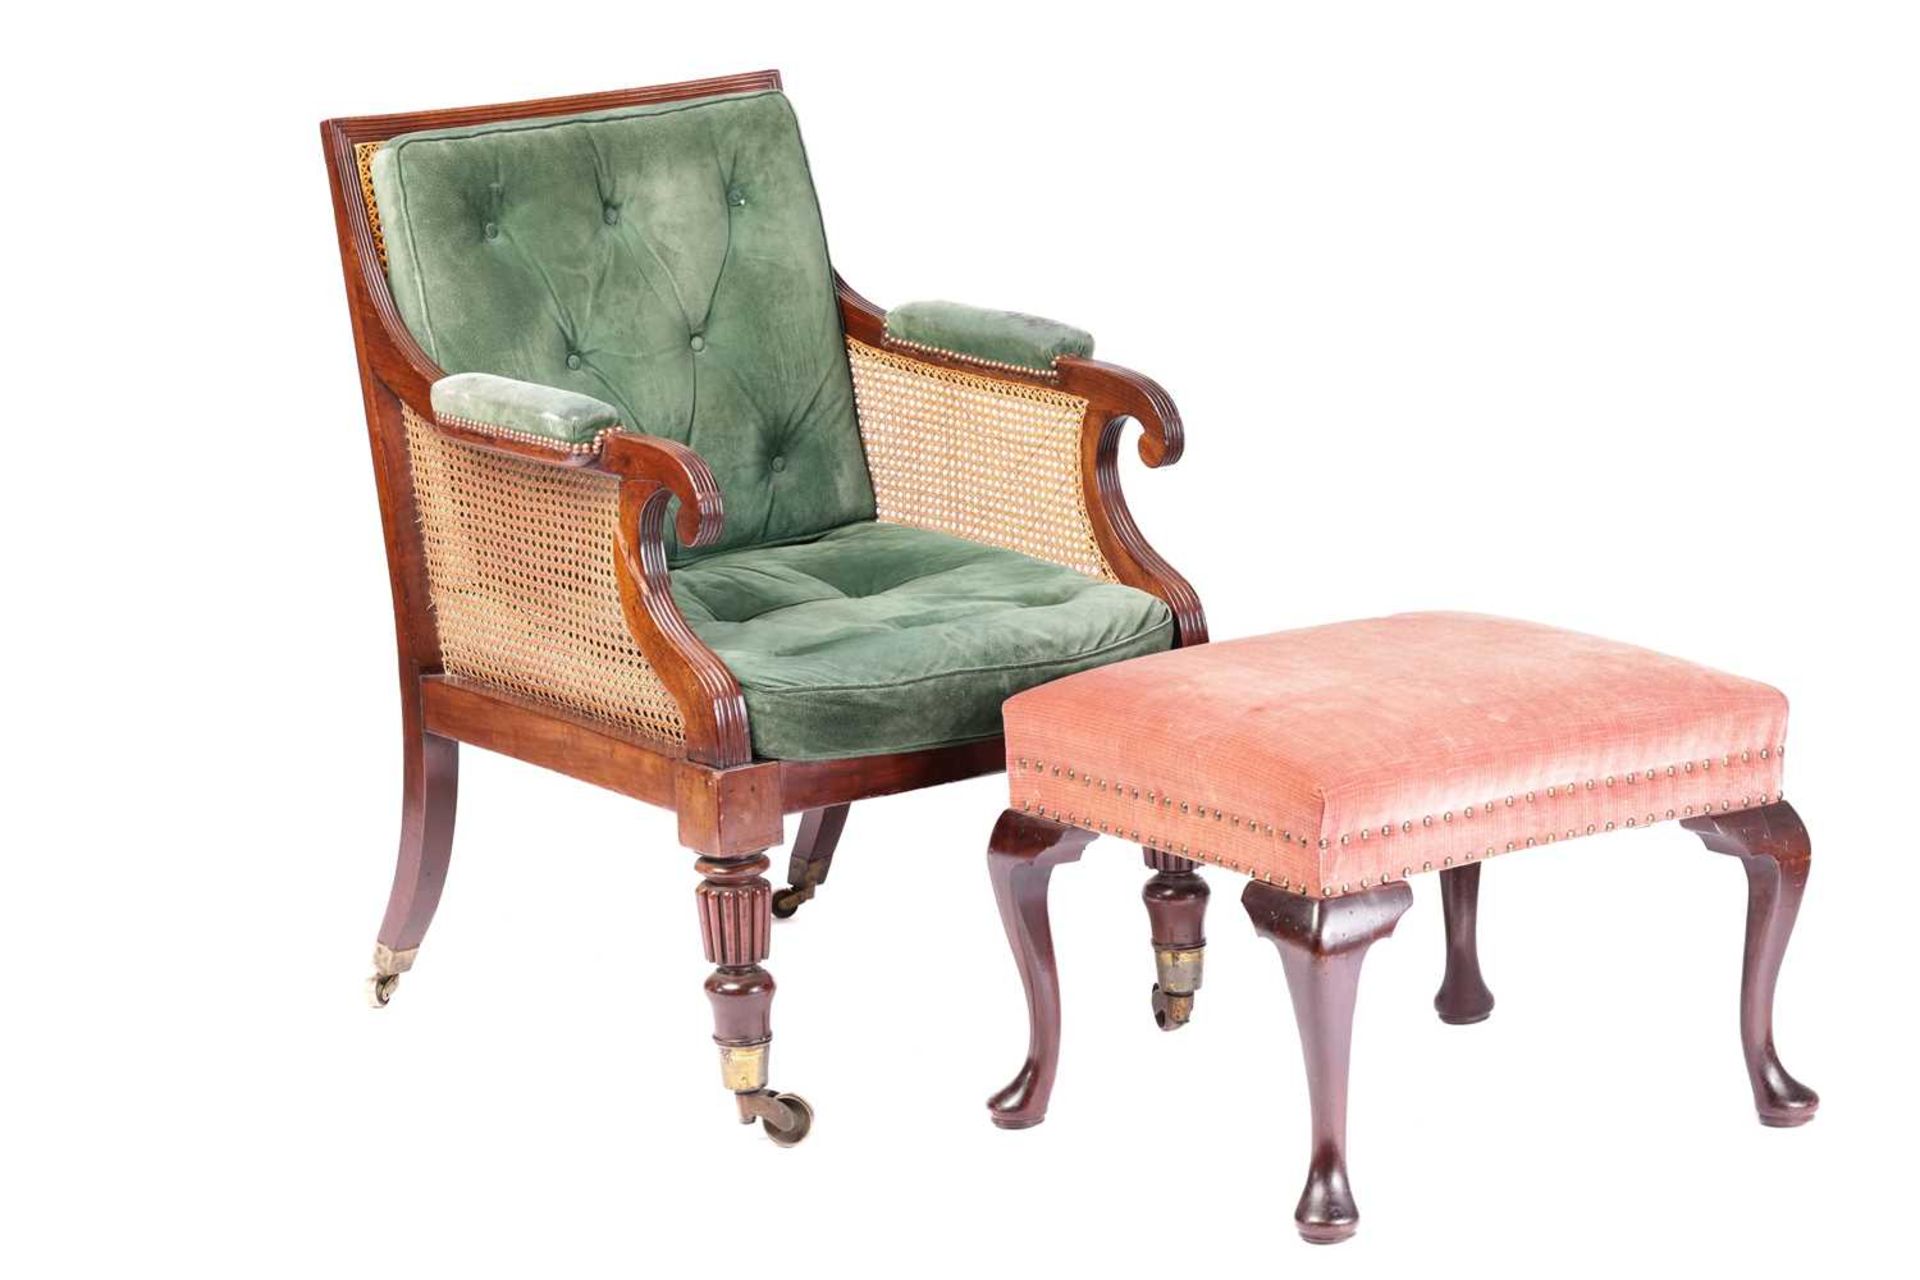 A George IV mahogany frame bergere library chair in the manner of Holland & Co, with cane back and